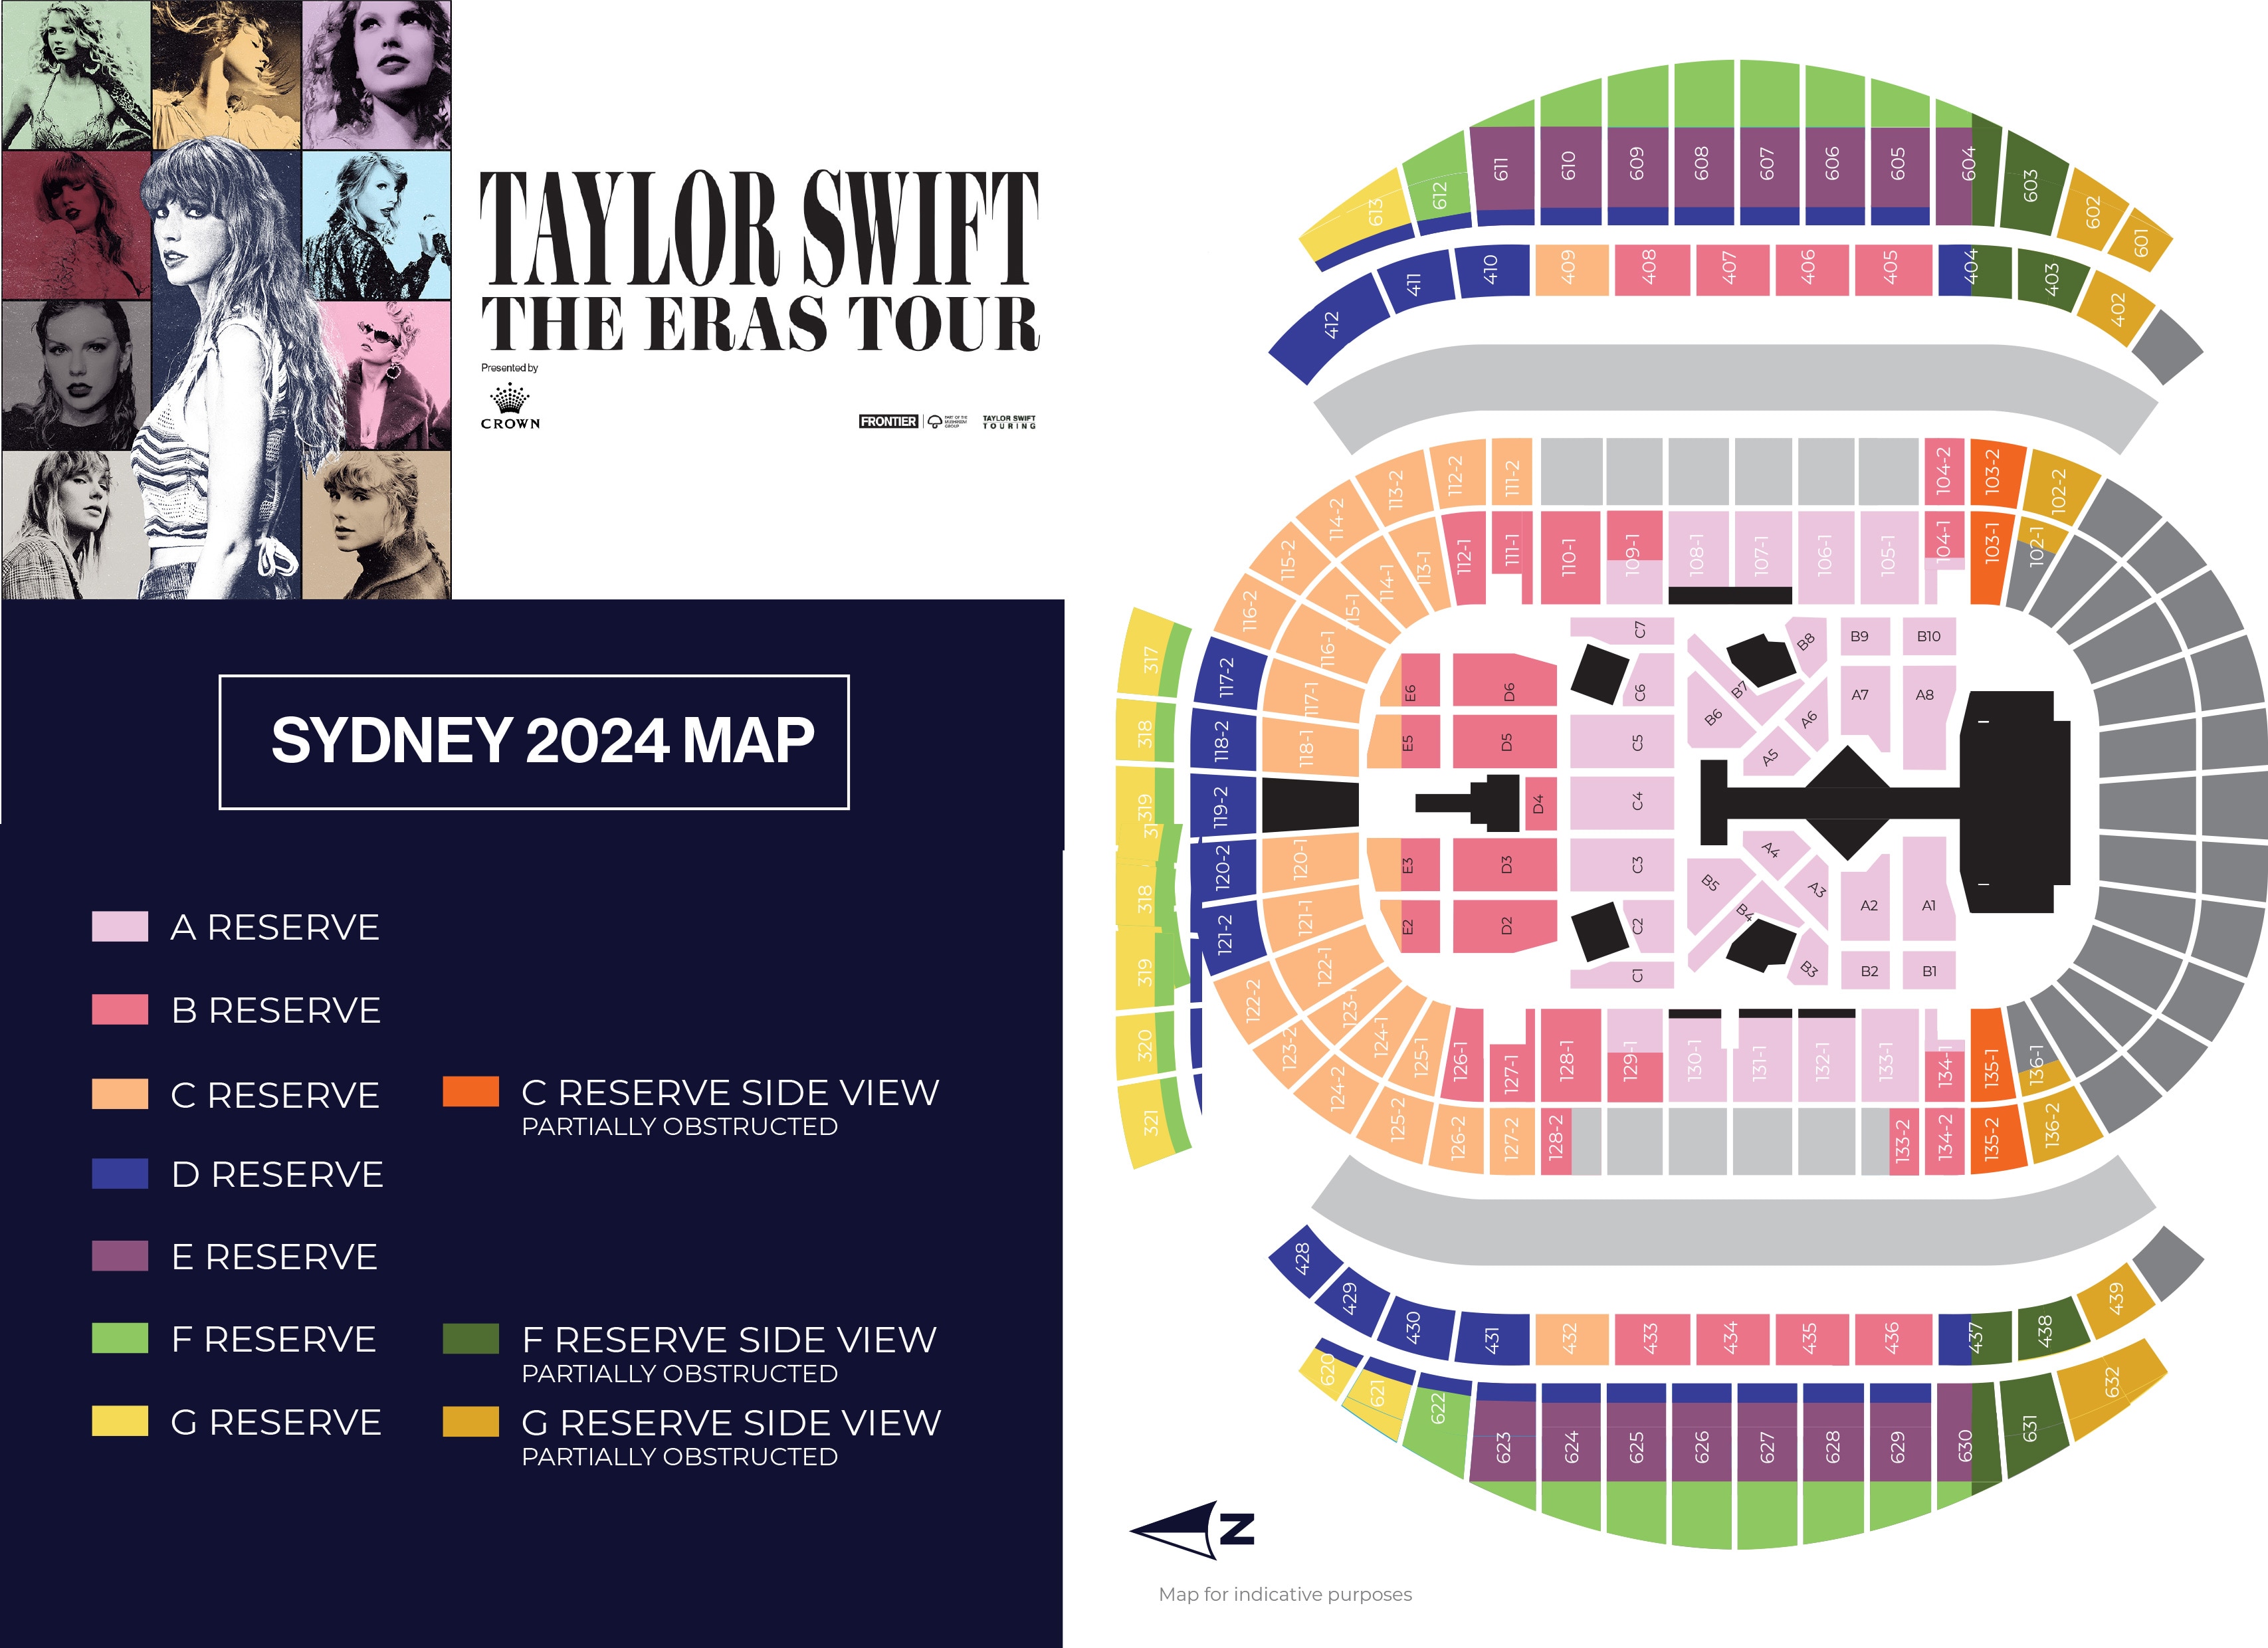 A venue map of the stadium showing seating options and prices.